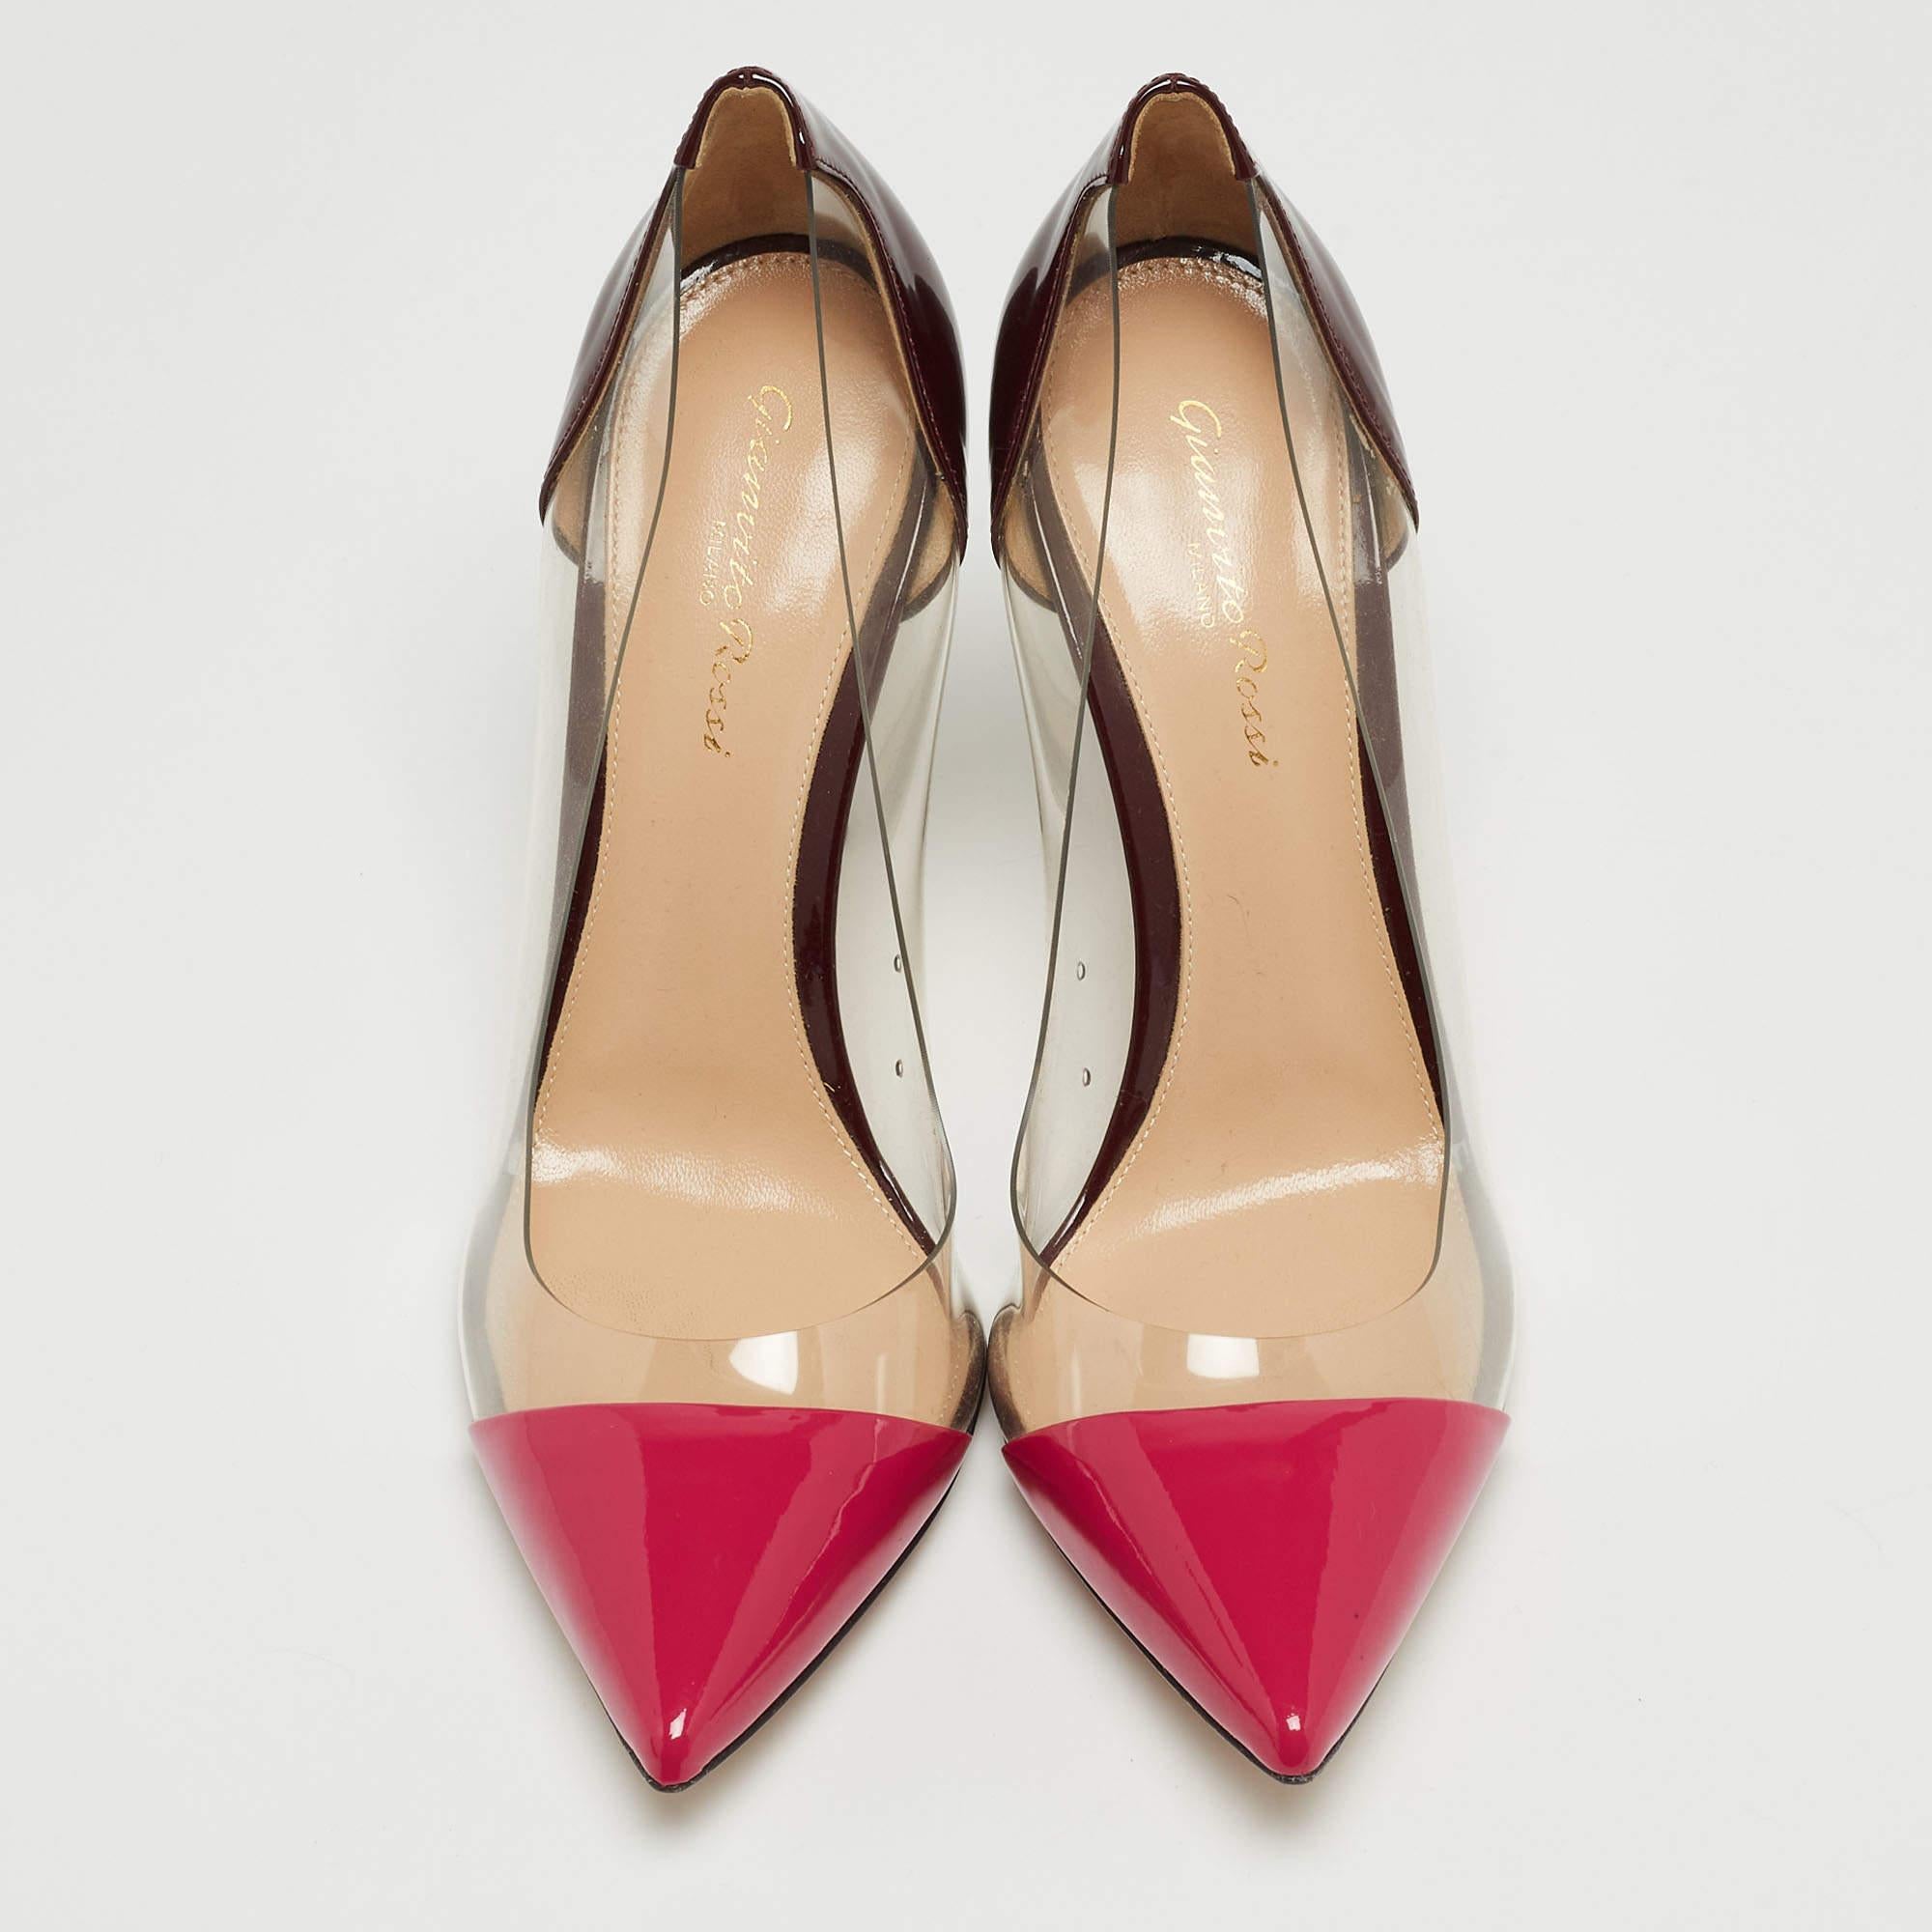 Gianvito Rossi Pink/Burgundy Patent Leather and PVC Plexi Pumps Size 38.5 For Sale 3